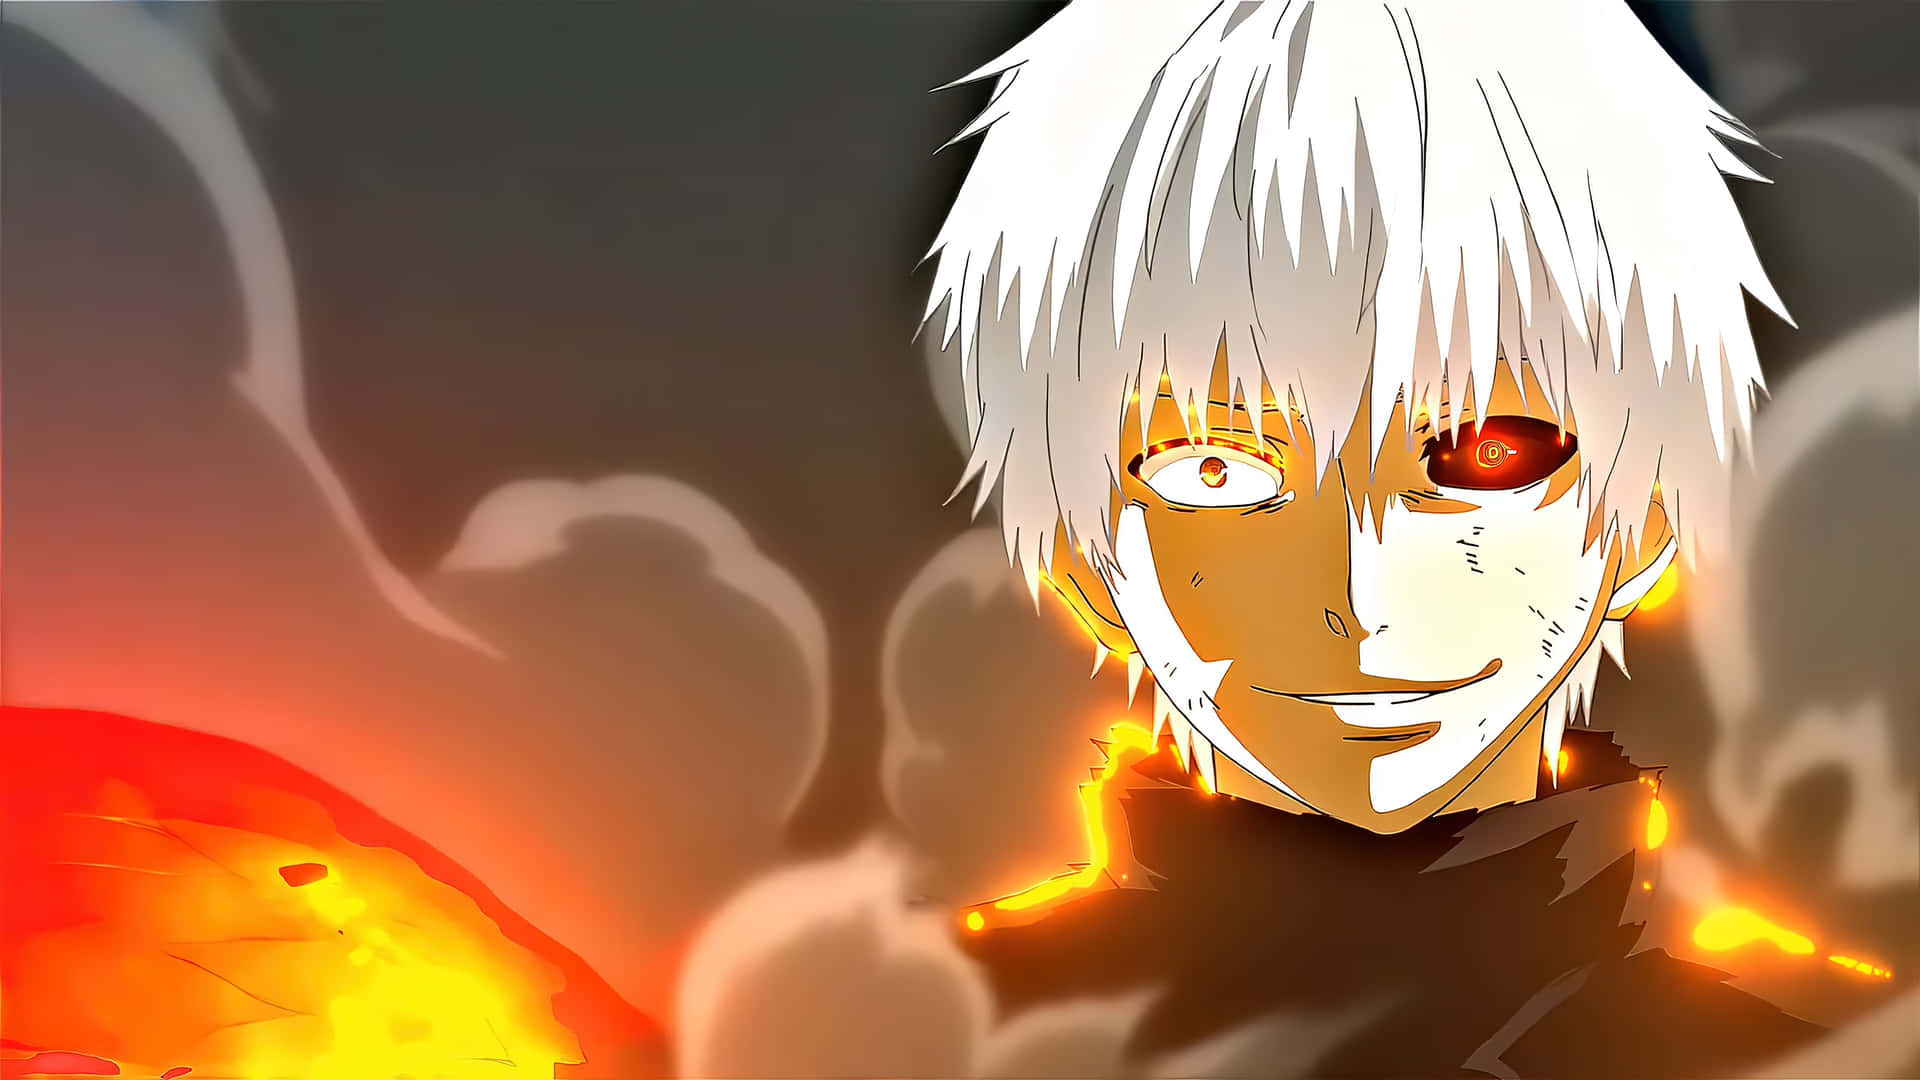 Tokyo Ghoul: Where to Watch & Read the Series